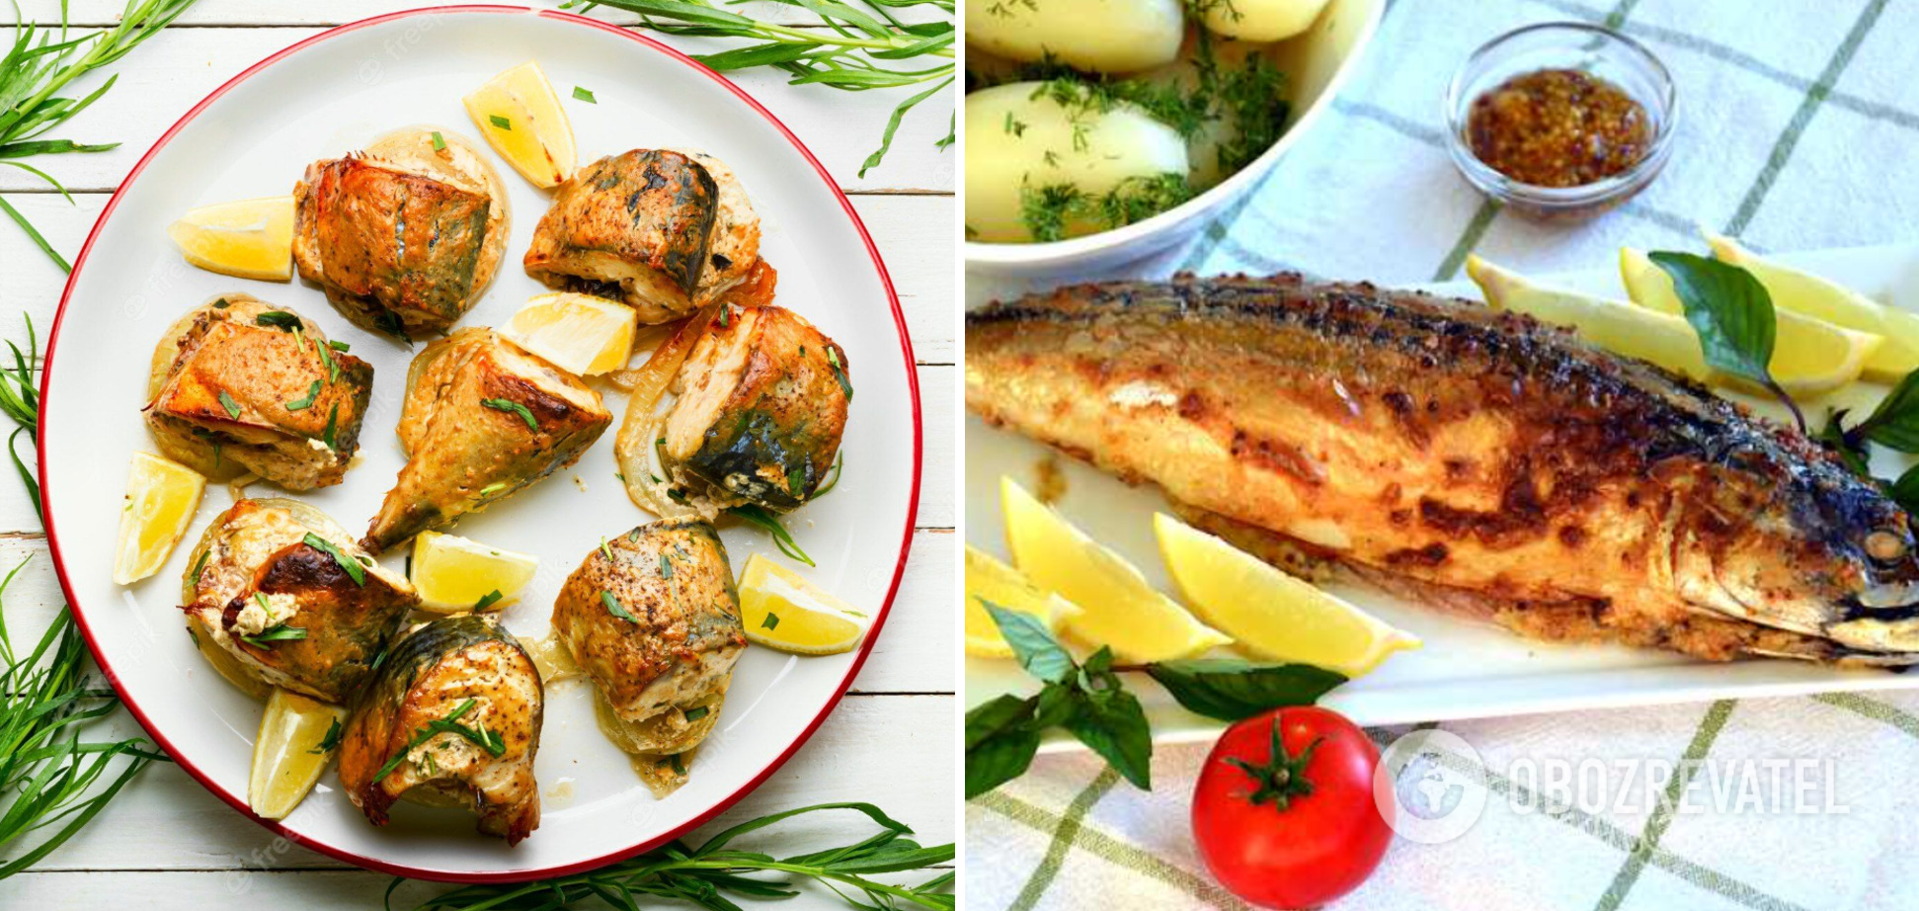 What marinade is good to bake mackerel in the oven